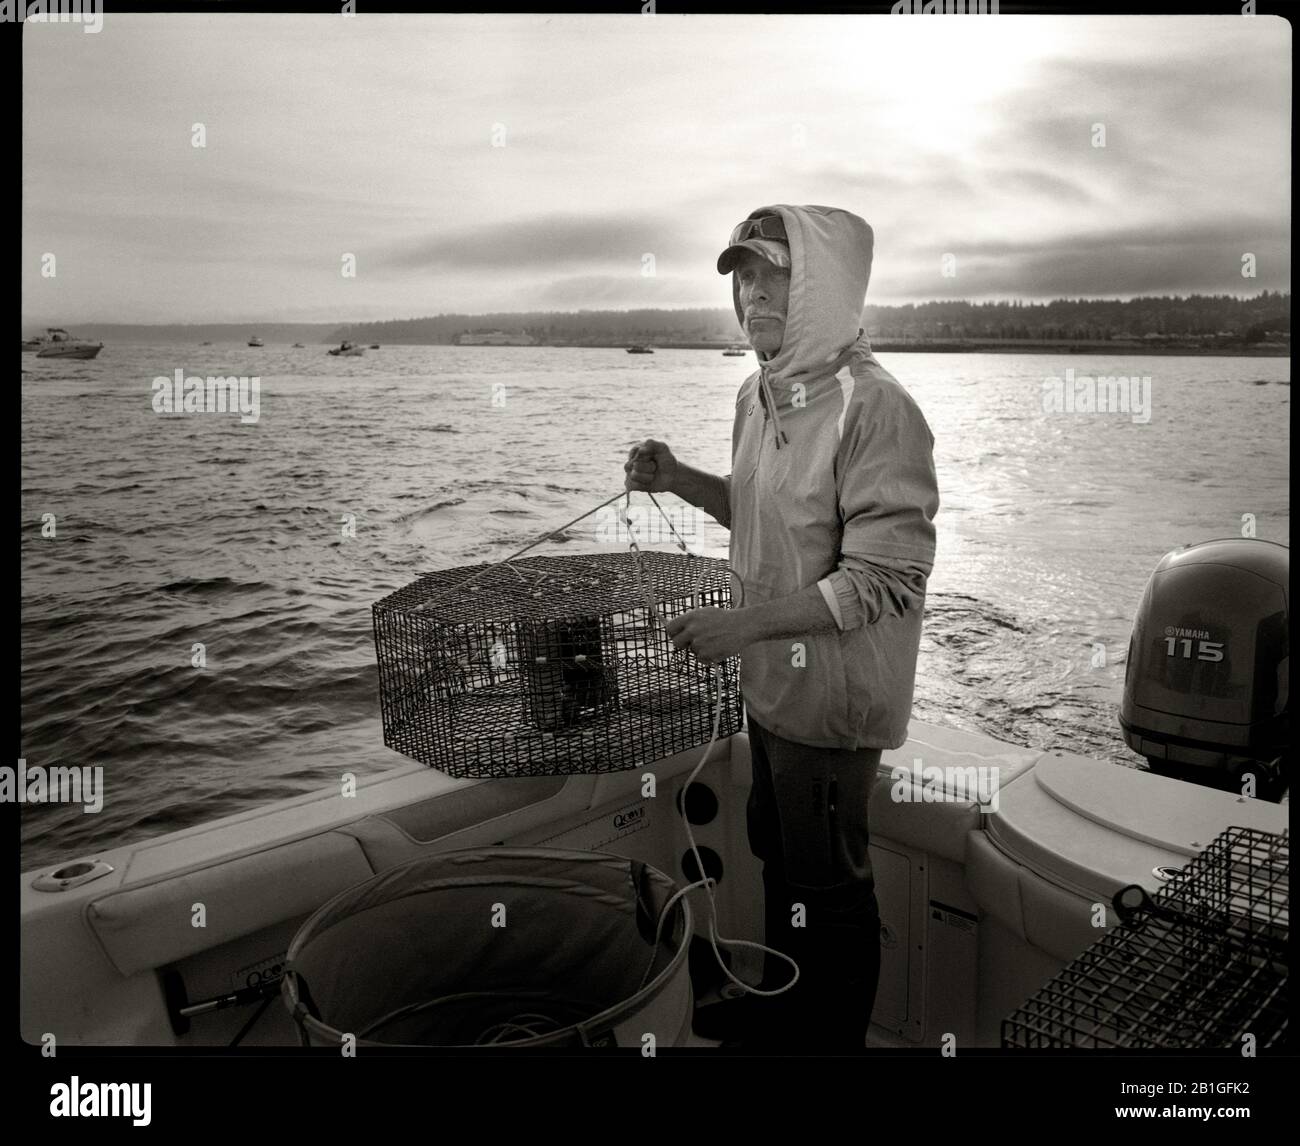 HB39102-00....WASHINGTON - Phil Russel shrimp fishing in the Puget Sound. Makina W67 Camera with Kodak 120 TXP Film processed in D76 1-1. Stock Photo